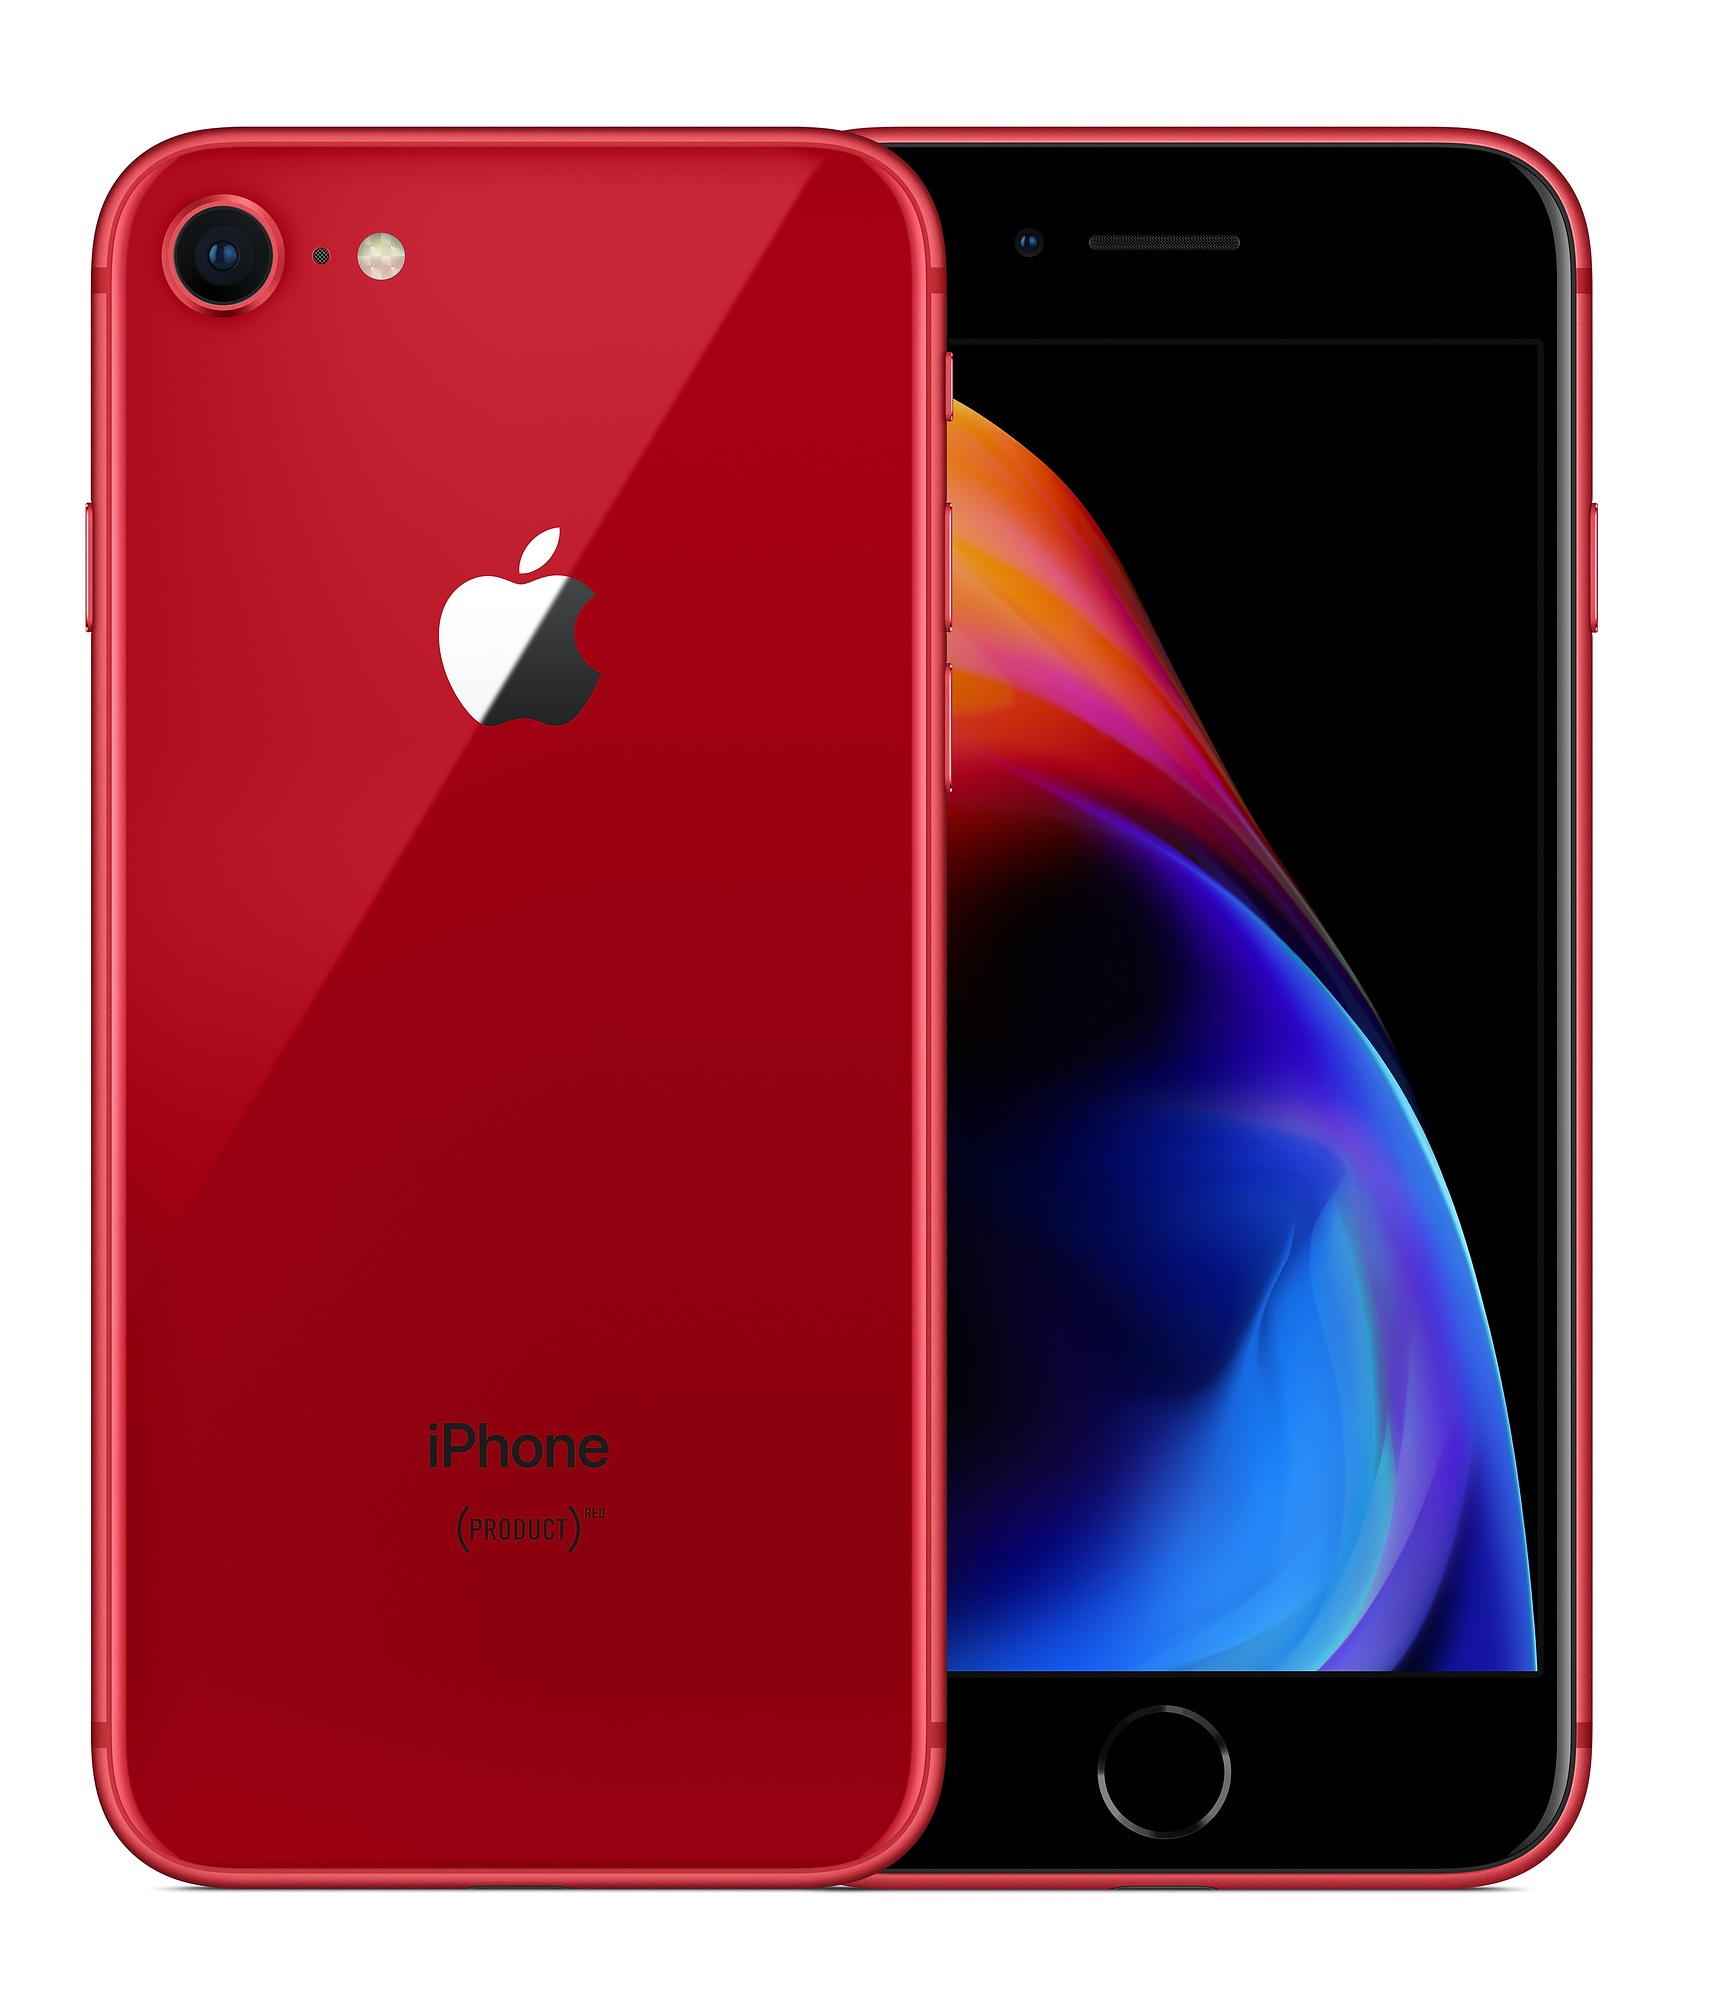 MRRM2AH/A - $191 - Apple iPhone 8 64GB RED Mixed Versions, L1 Tested